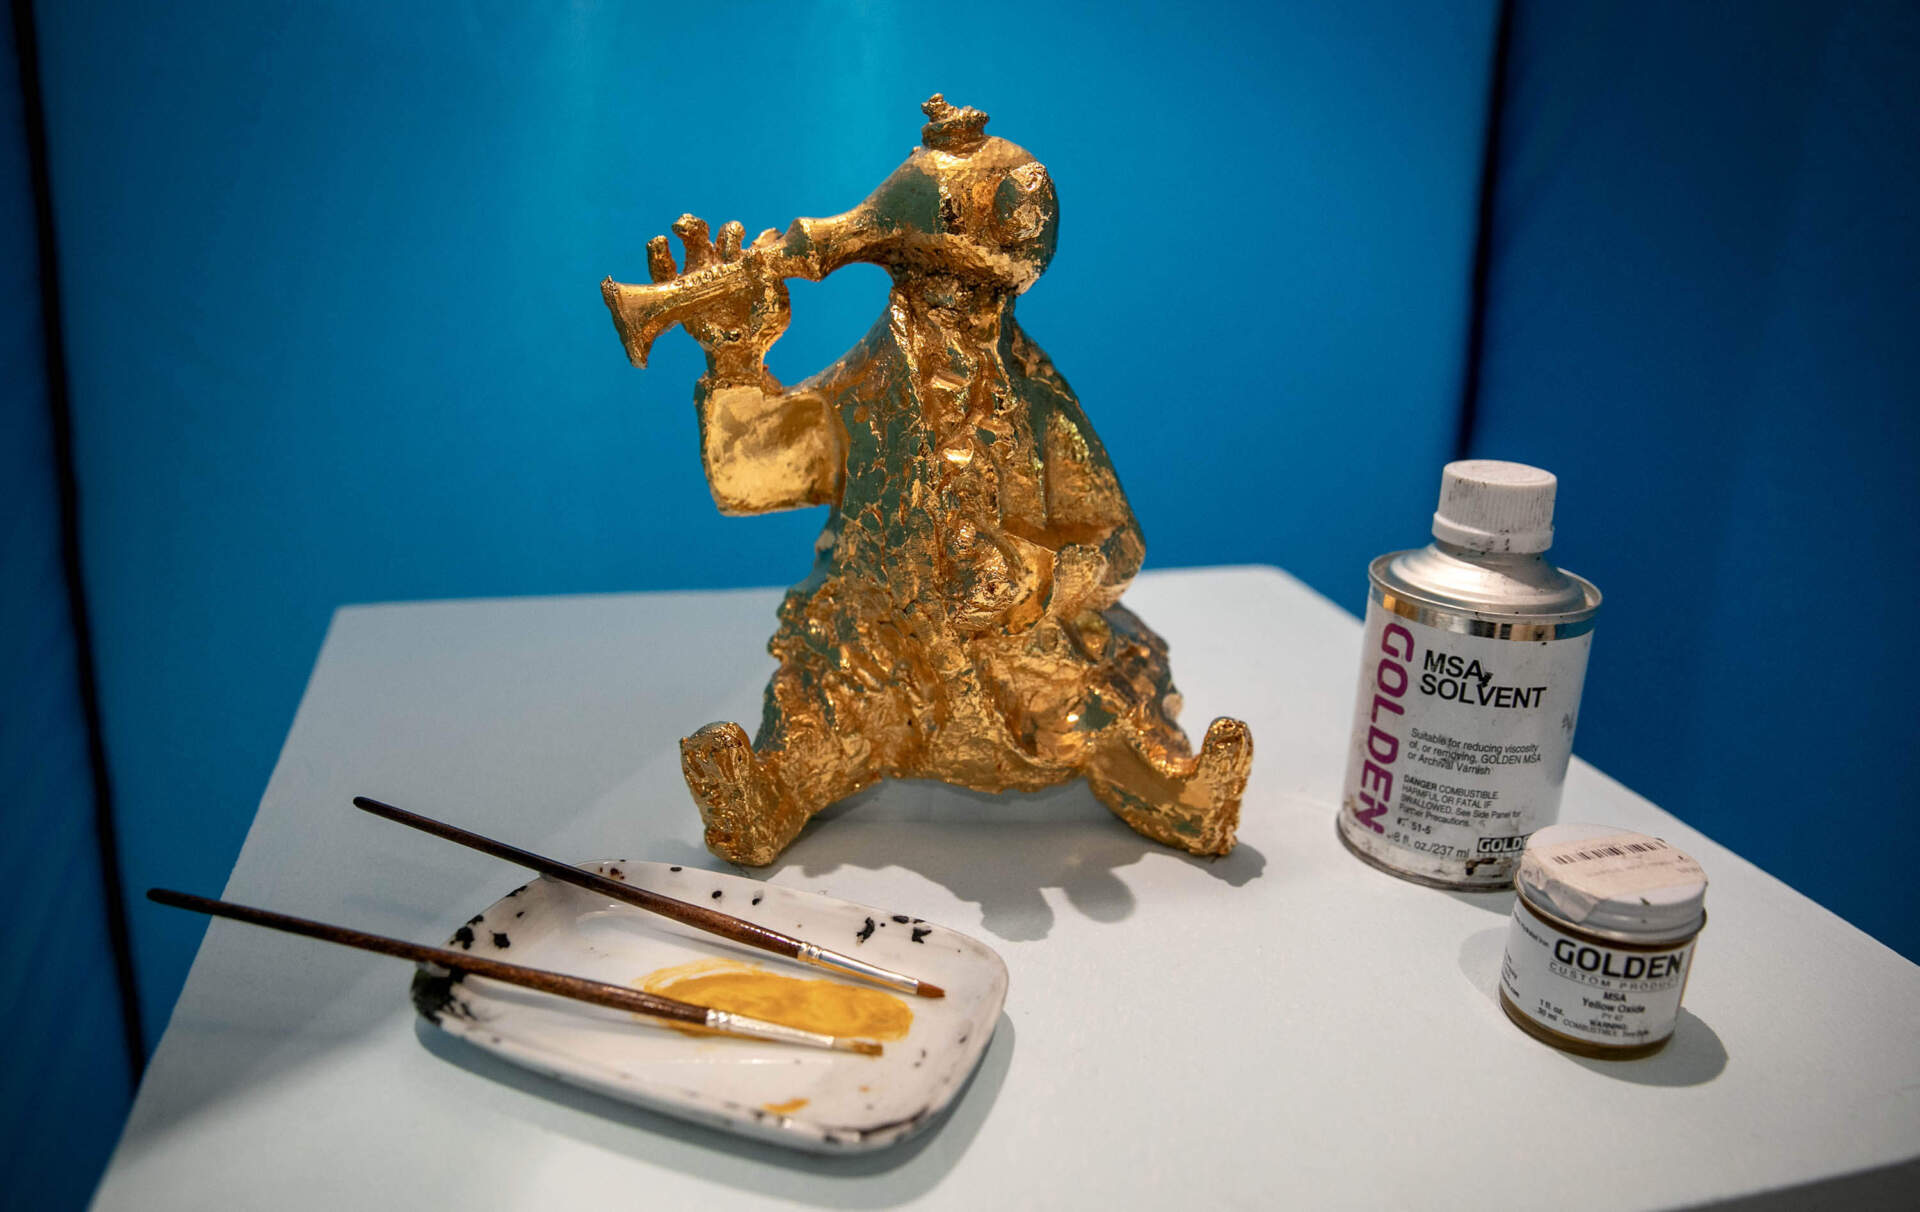 On display at Cambridge Arts' "Rust Happen(s) exhibit, a duplicate of Konstantin Simun's "Fokin Memorial" in Brattle Square with tools required to apply gold leaf. (Robin Lubbock/WBUR)